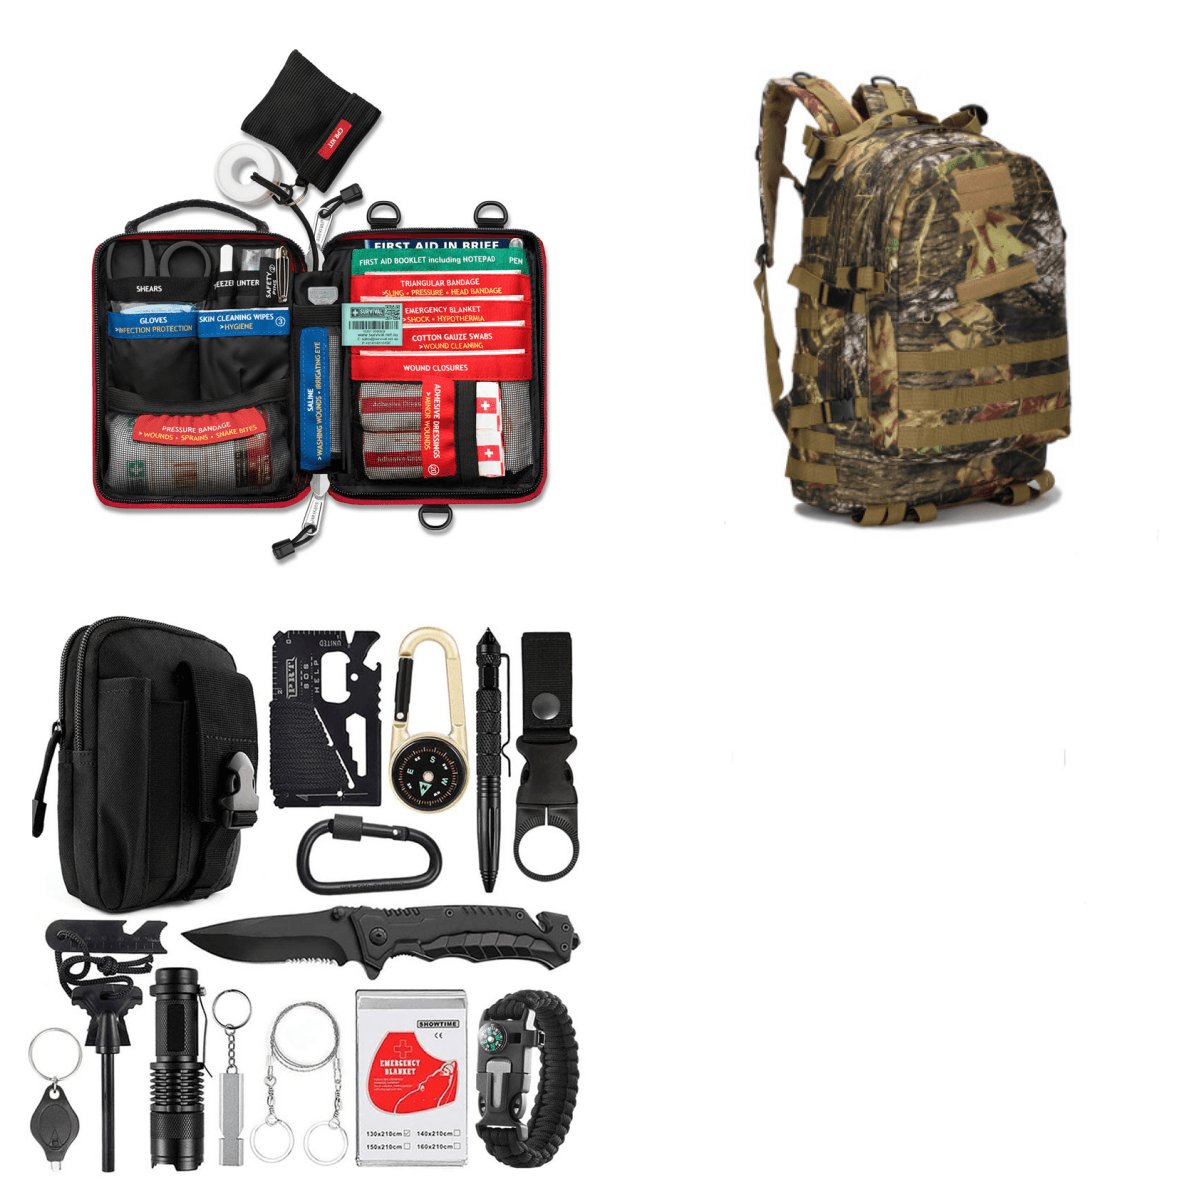 Latest Budget-Friendly Camping & Hiking Gear Set | TrendyAffordables - TrendyAffordables - 0